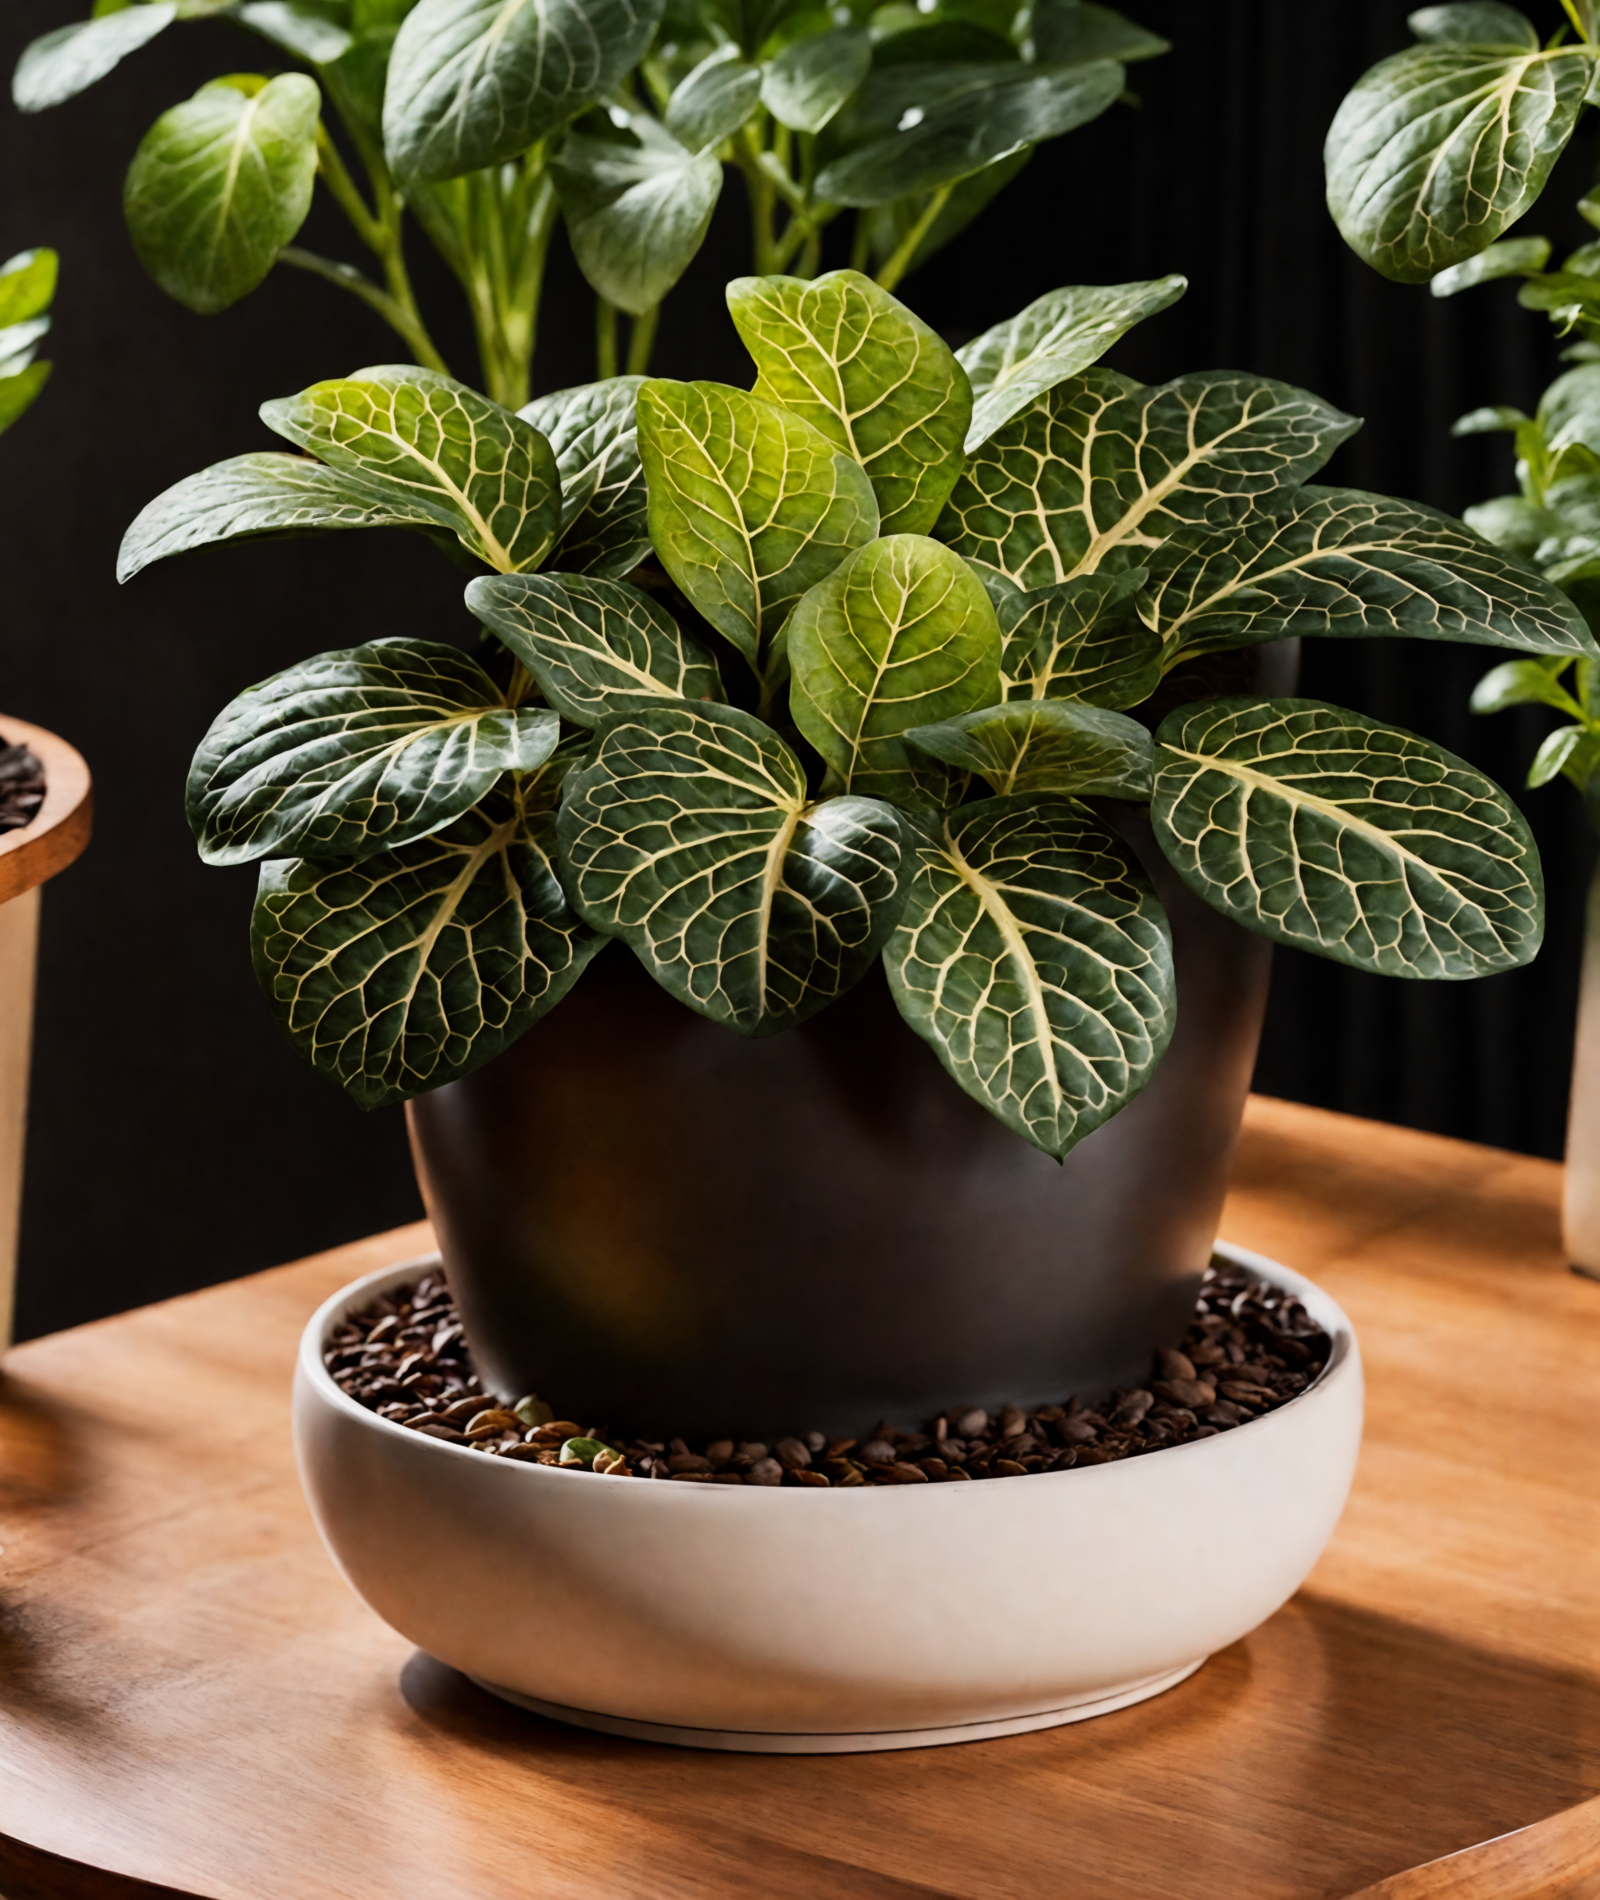 Fittonia albivenis, with its distinct vein patterns, nestled in a planter on a wooden table, in clear, neutral light.